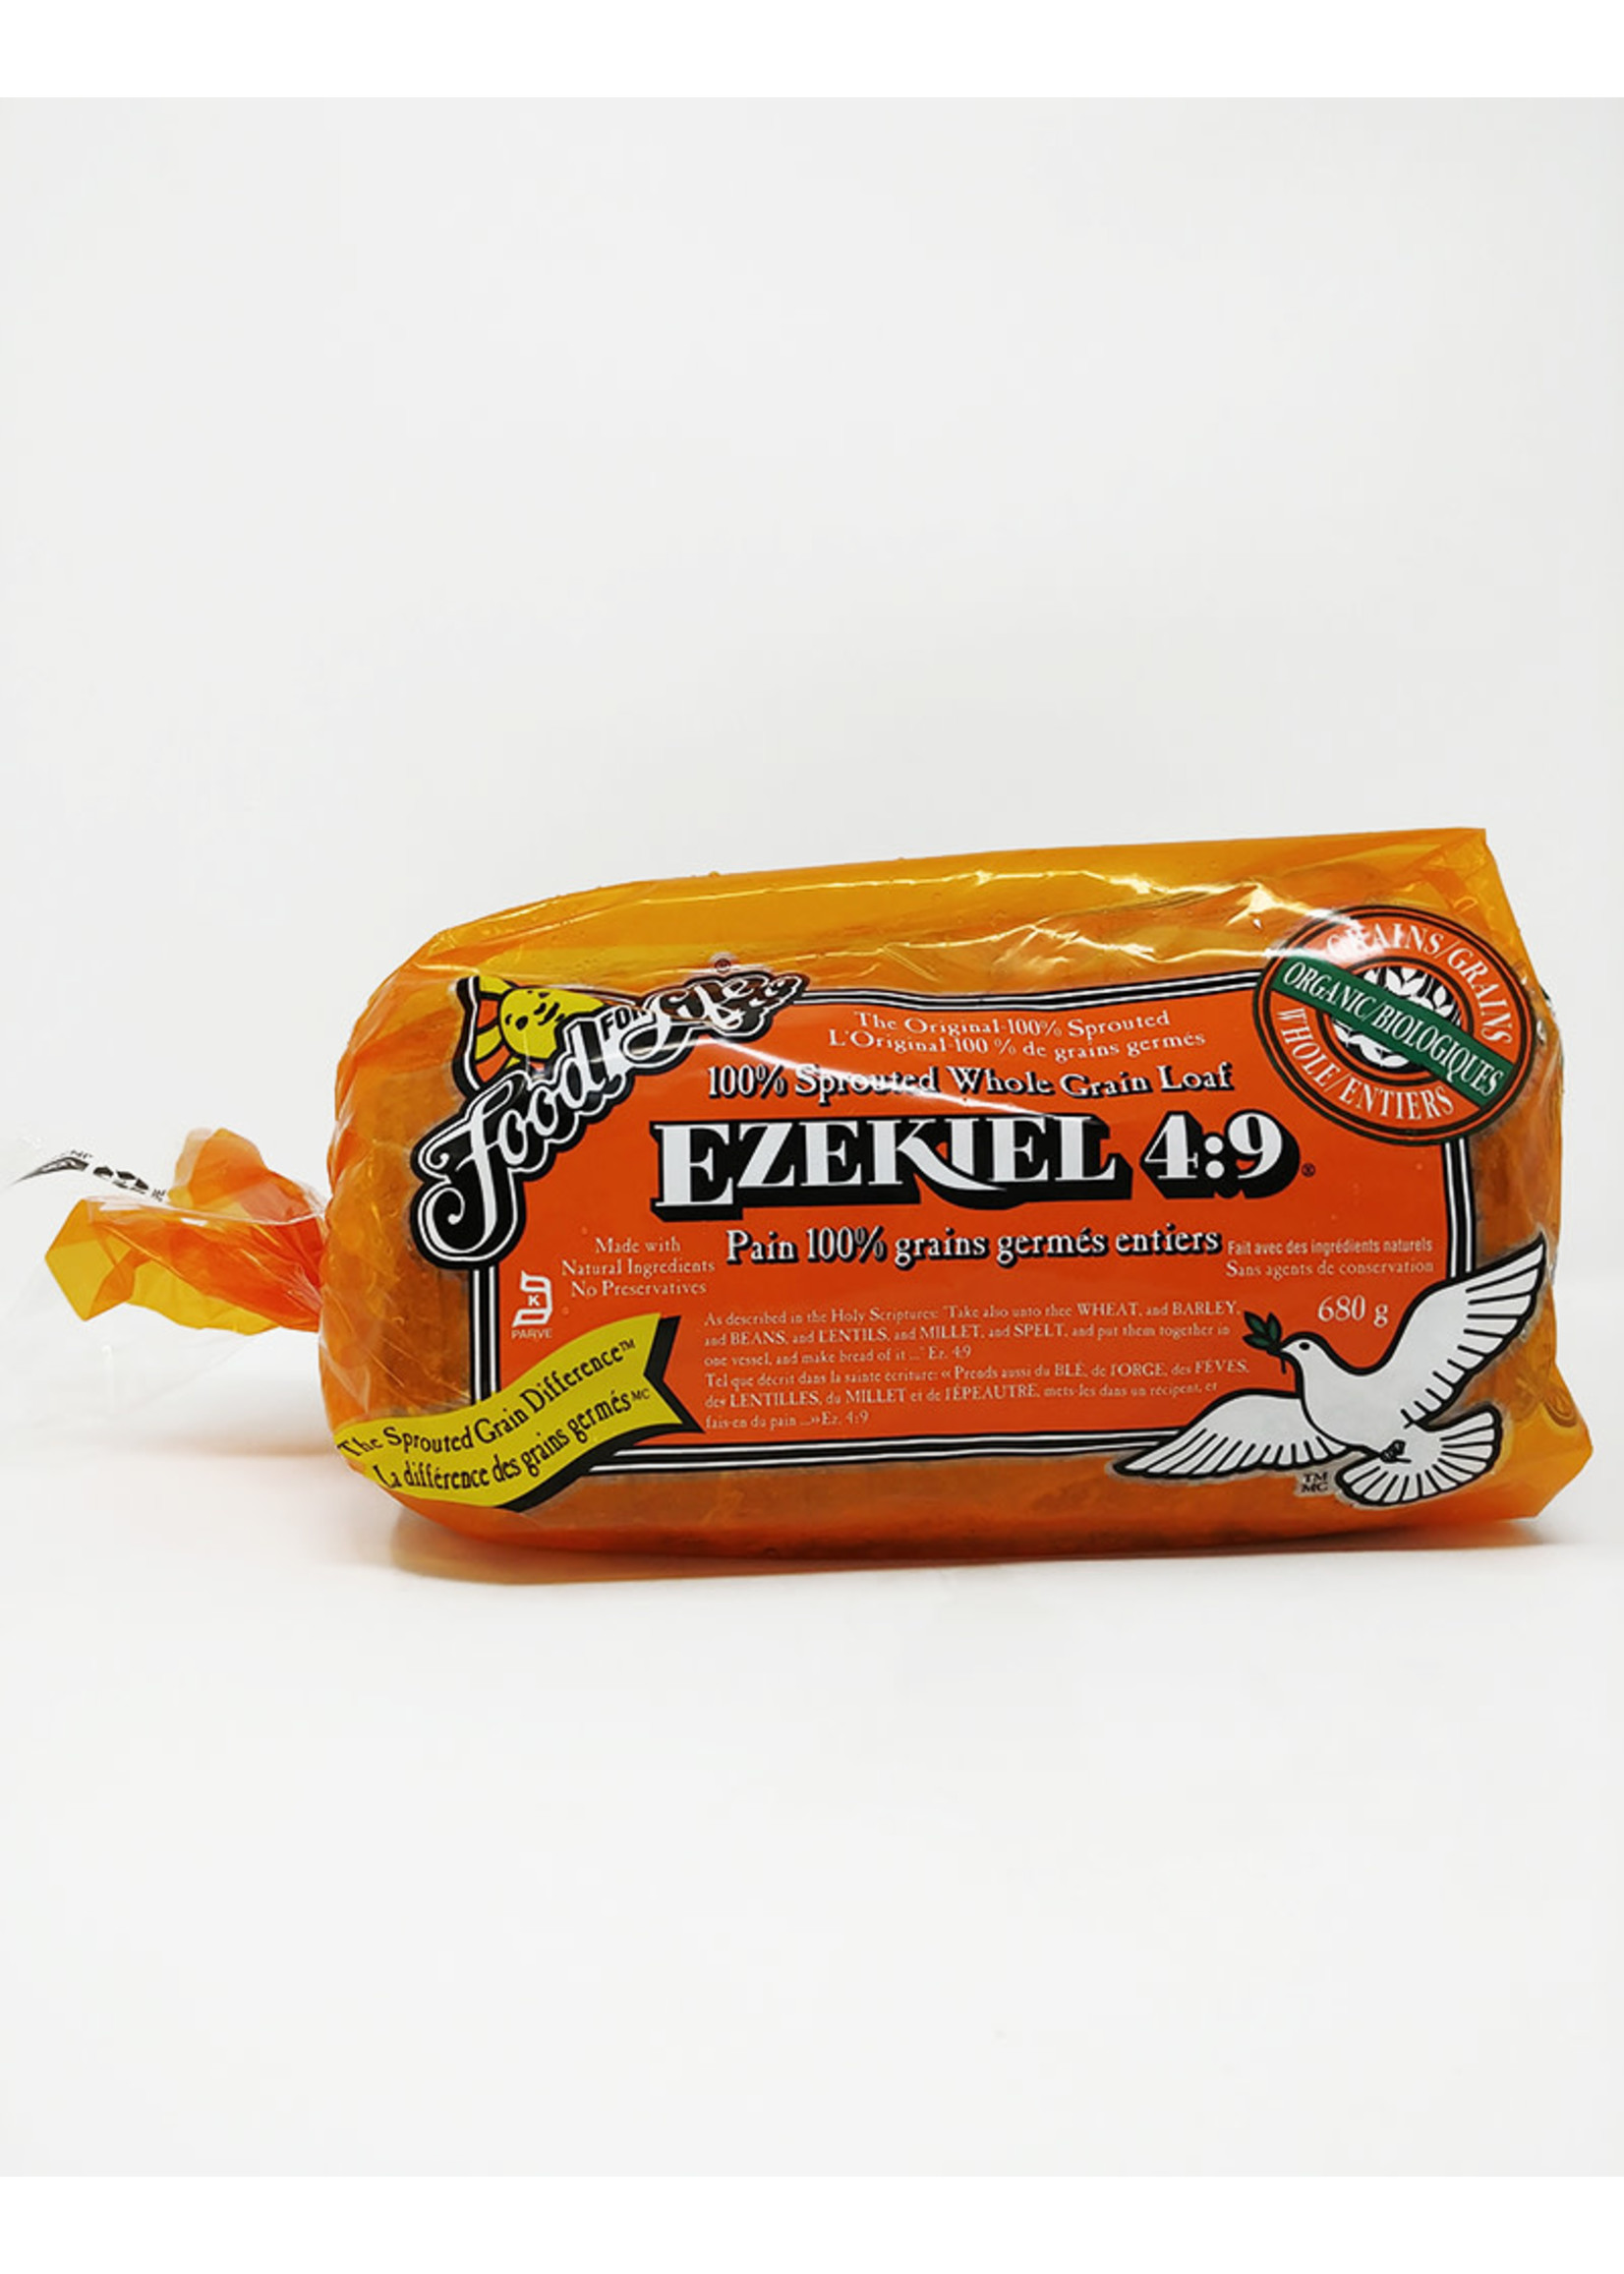 Food for Life FFL - Bread, Ezekiel 4:9 Sprouted Grain & Seed